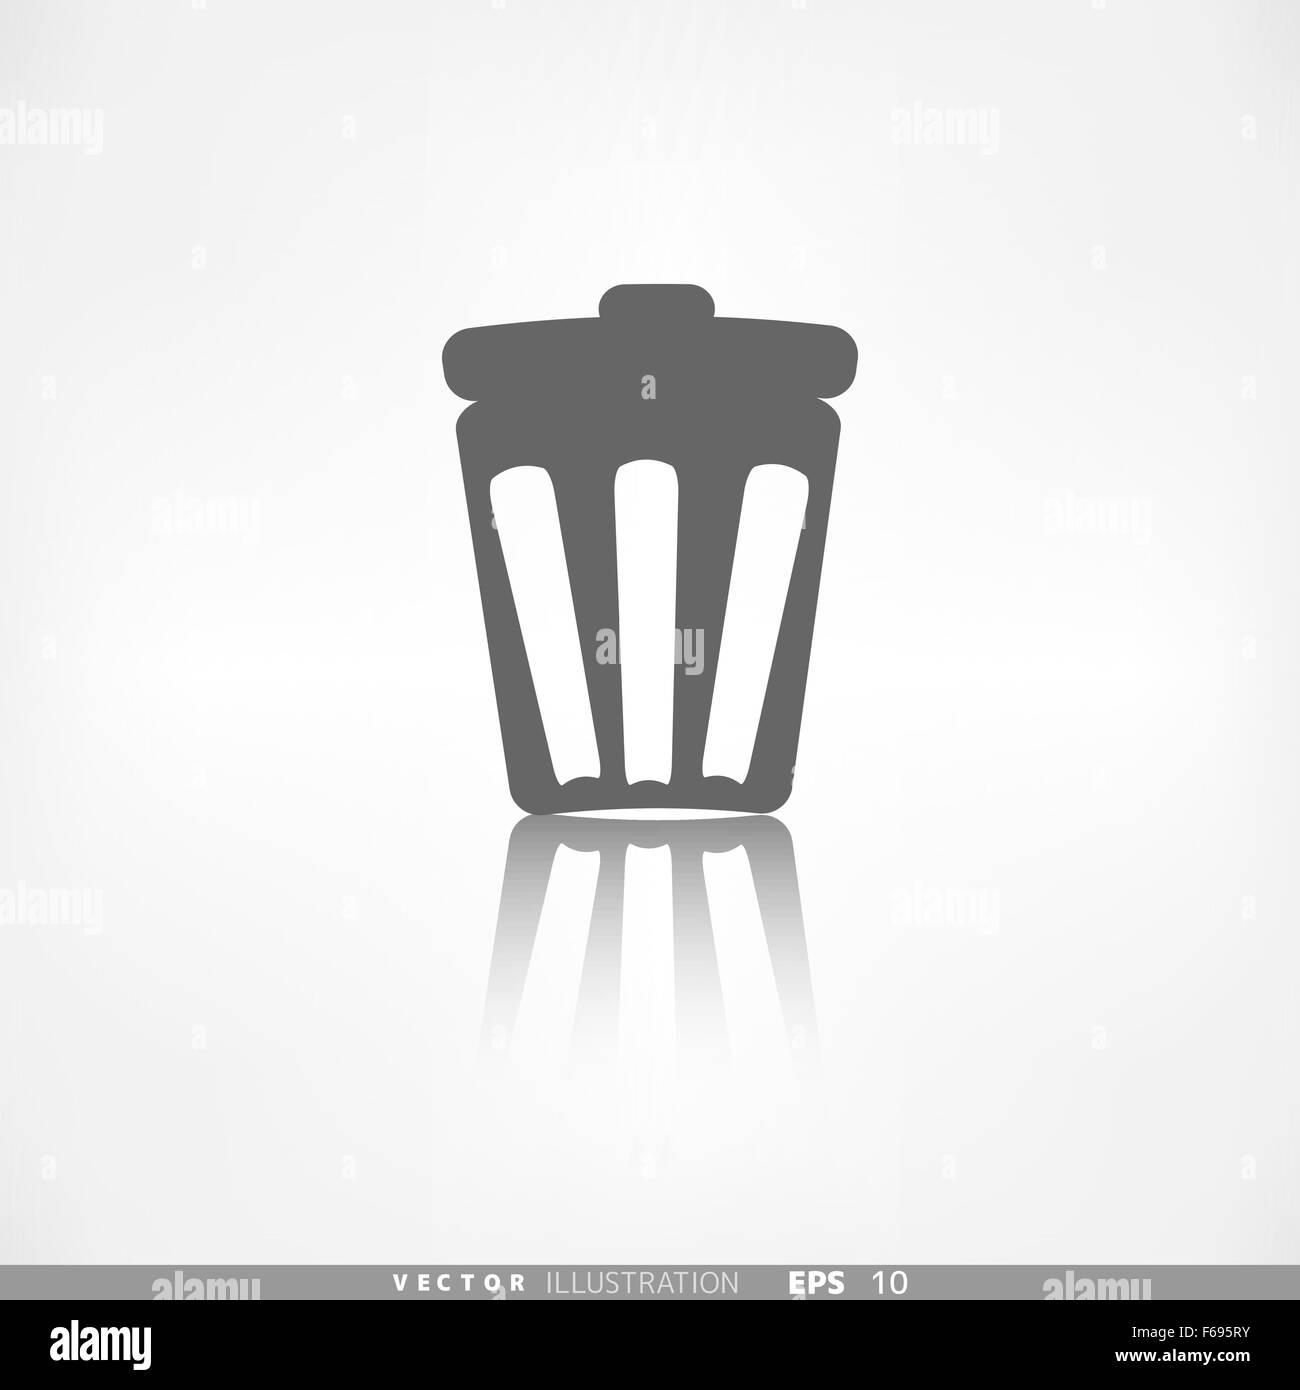 Trash can icon. Recycle symbol. Waste container. Stock Vector